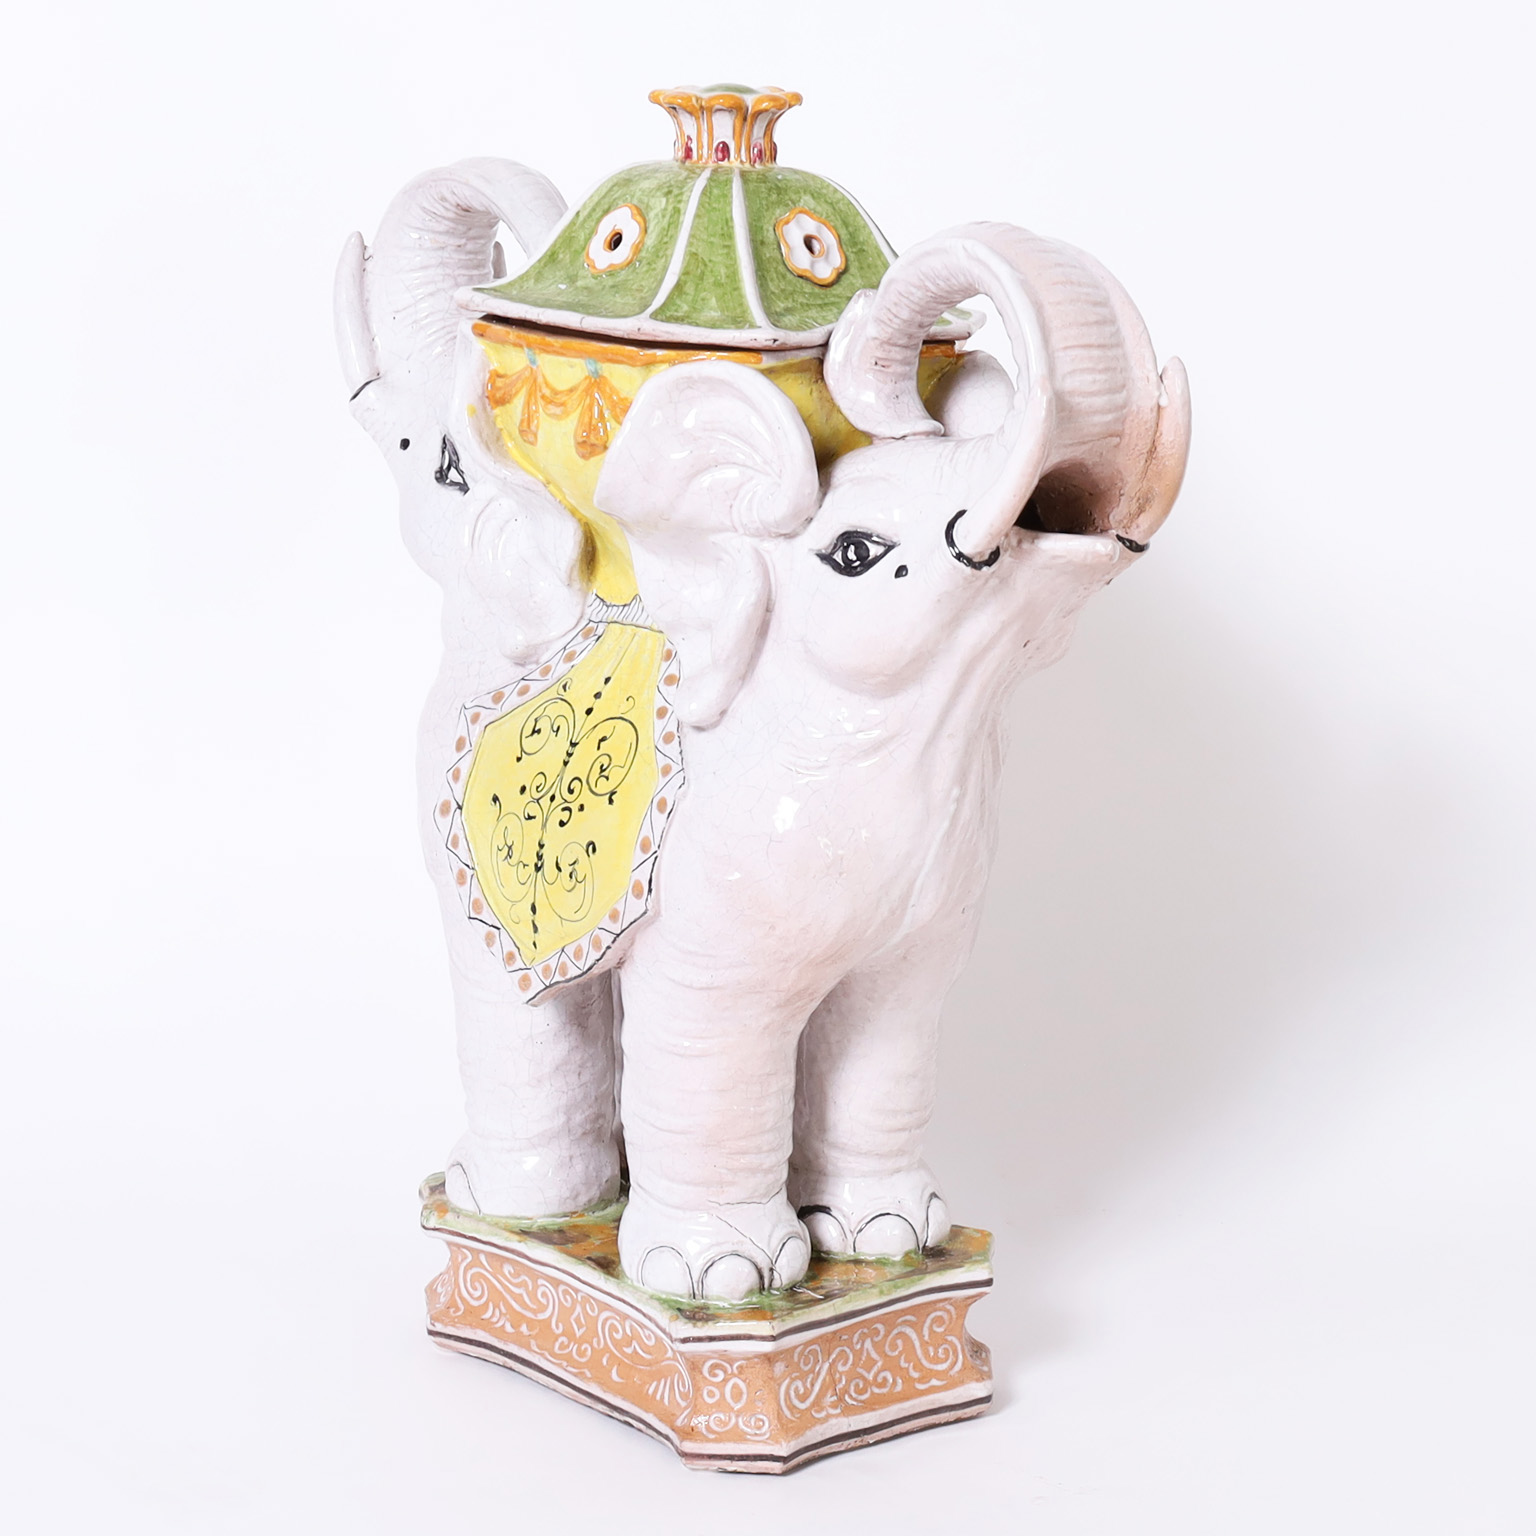 Glazed Terra Cotta Elephant Stand with Lidded Compartment